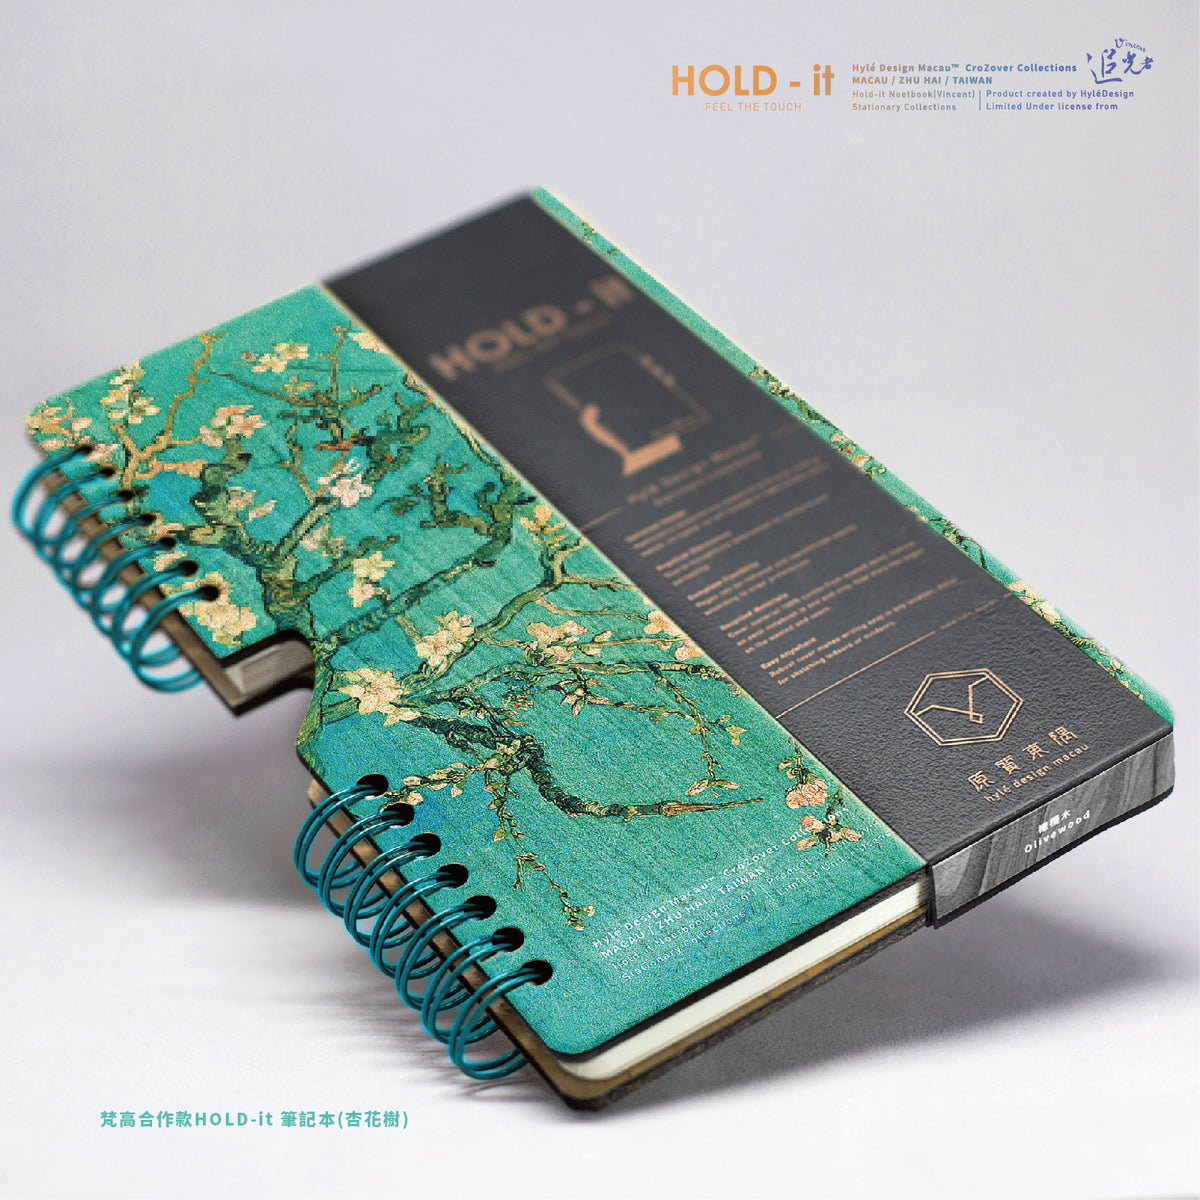 HOLD-it Notebook - Refill Pad